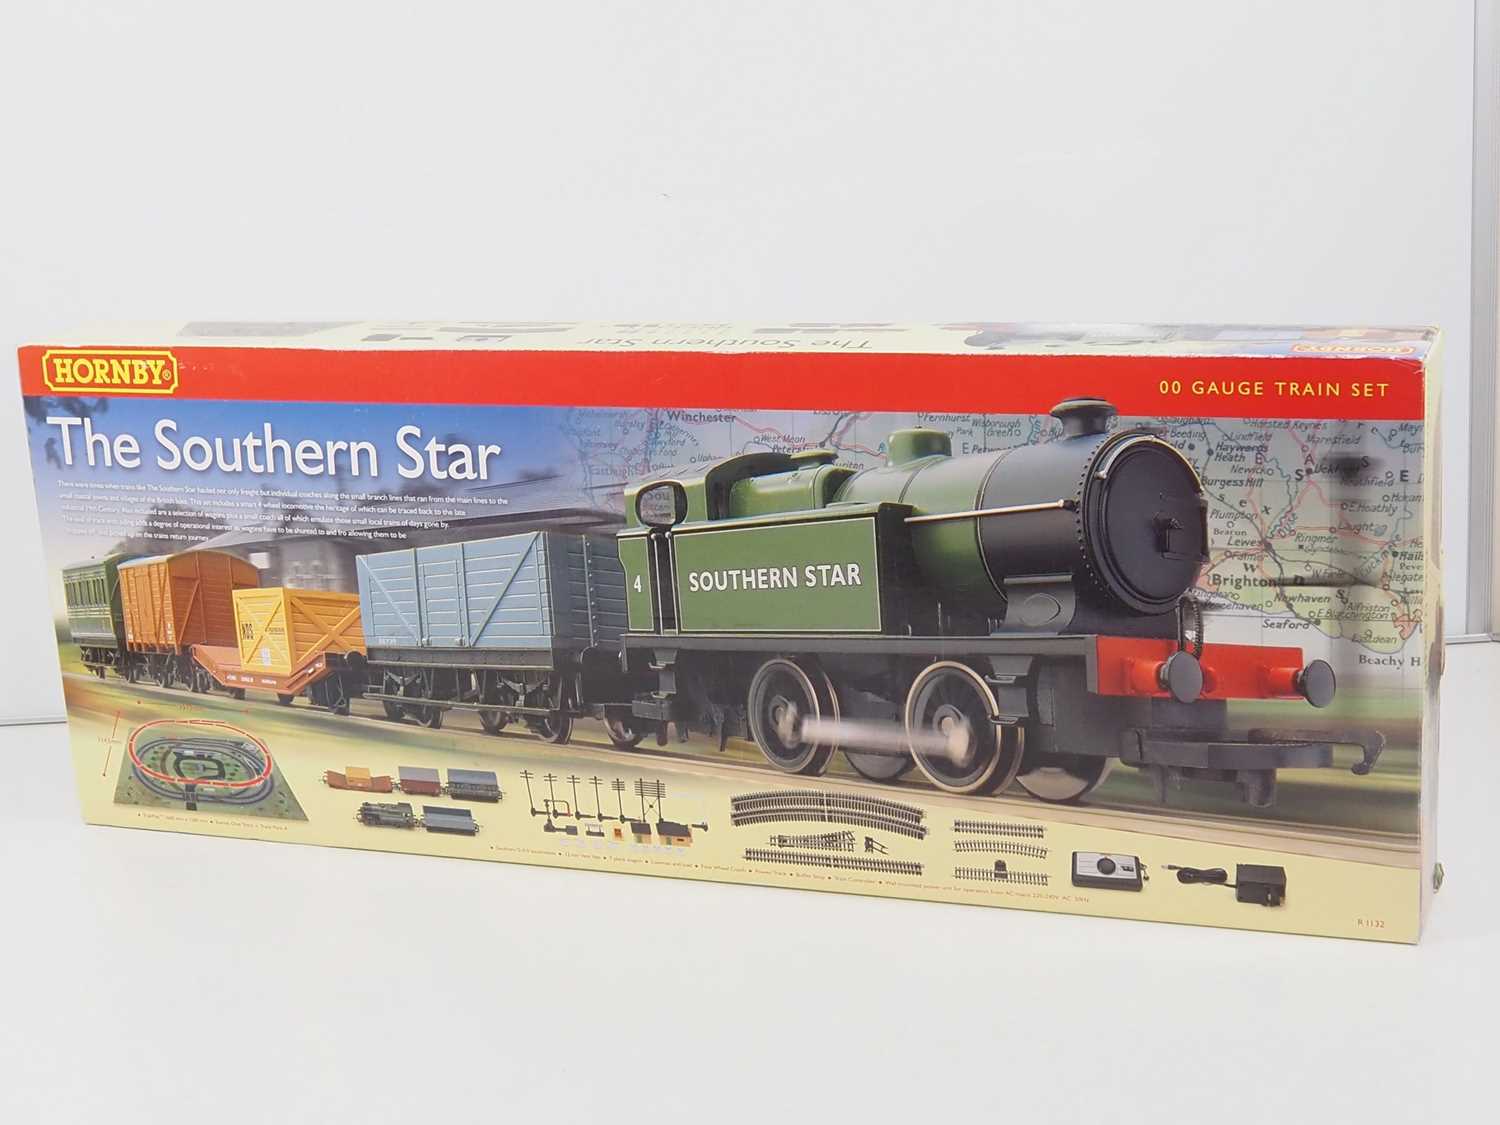 A HORNBY R1132 OO gauge 'The Southern Star' train set comprising a steam loco, wagons, coach and - Image 6 of 8